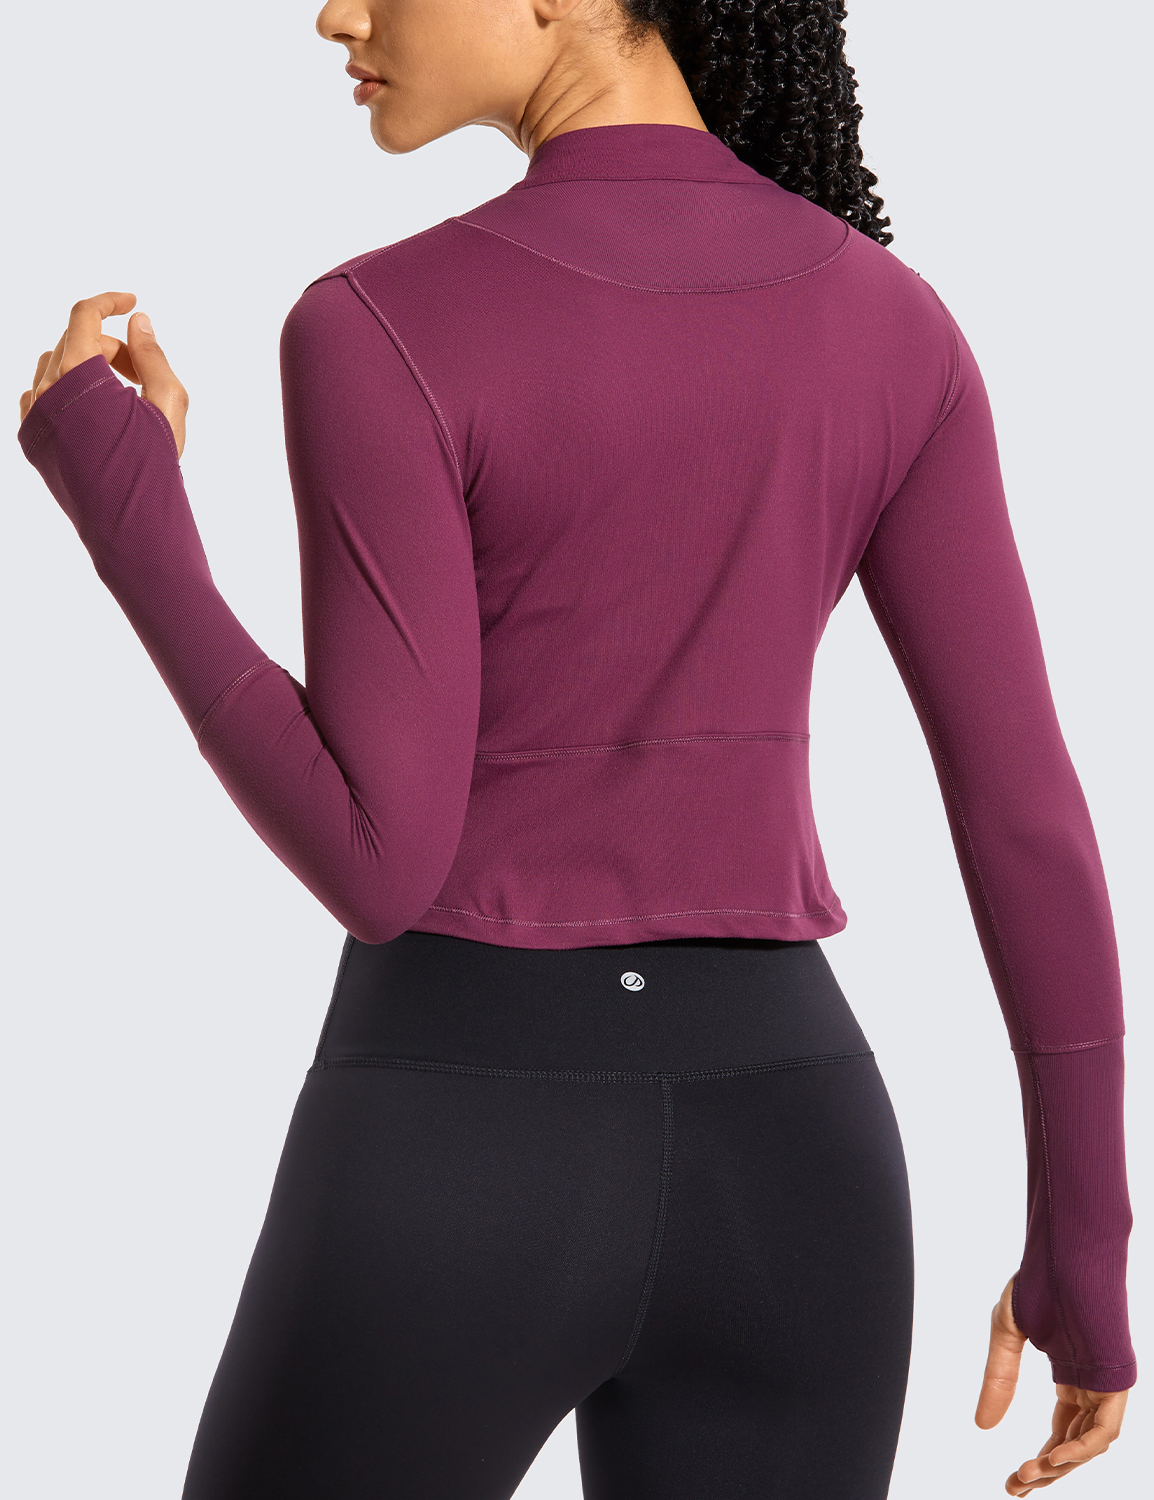 athletic tops for women